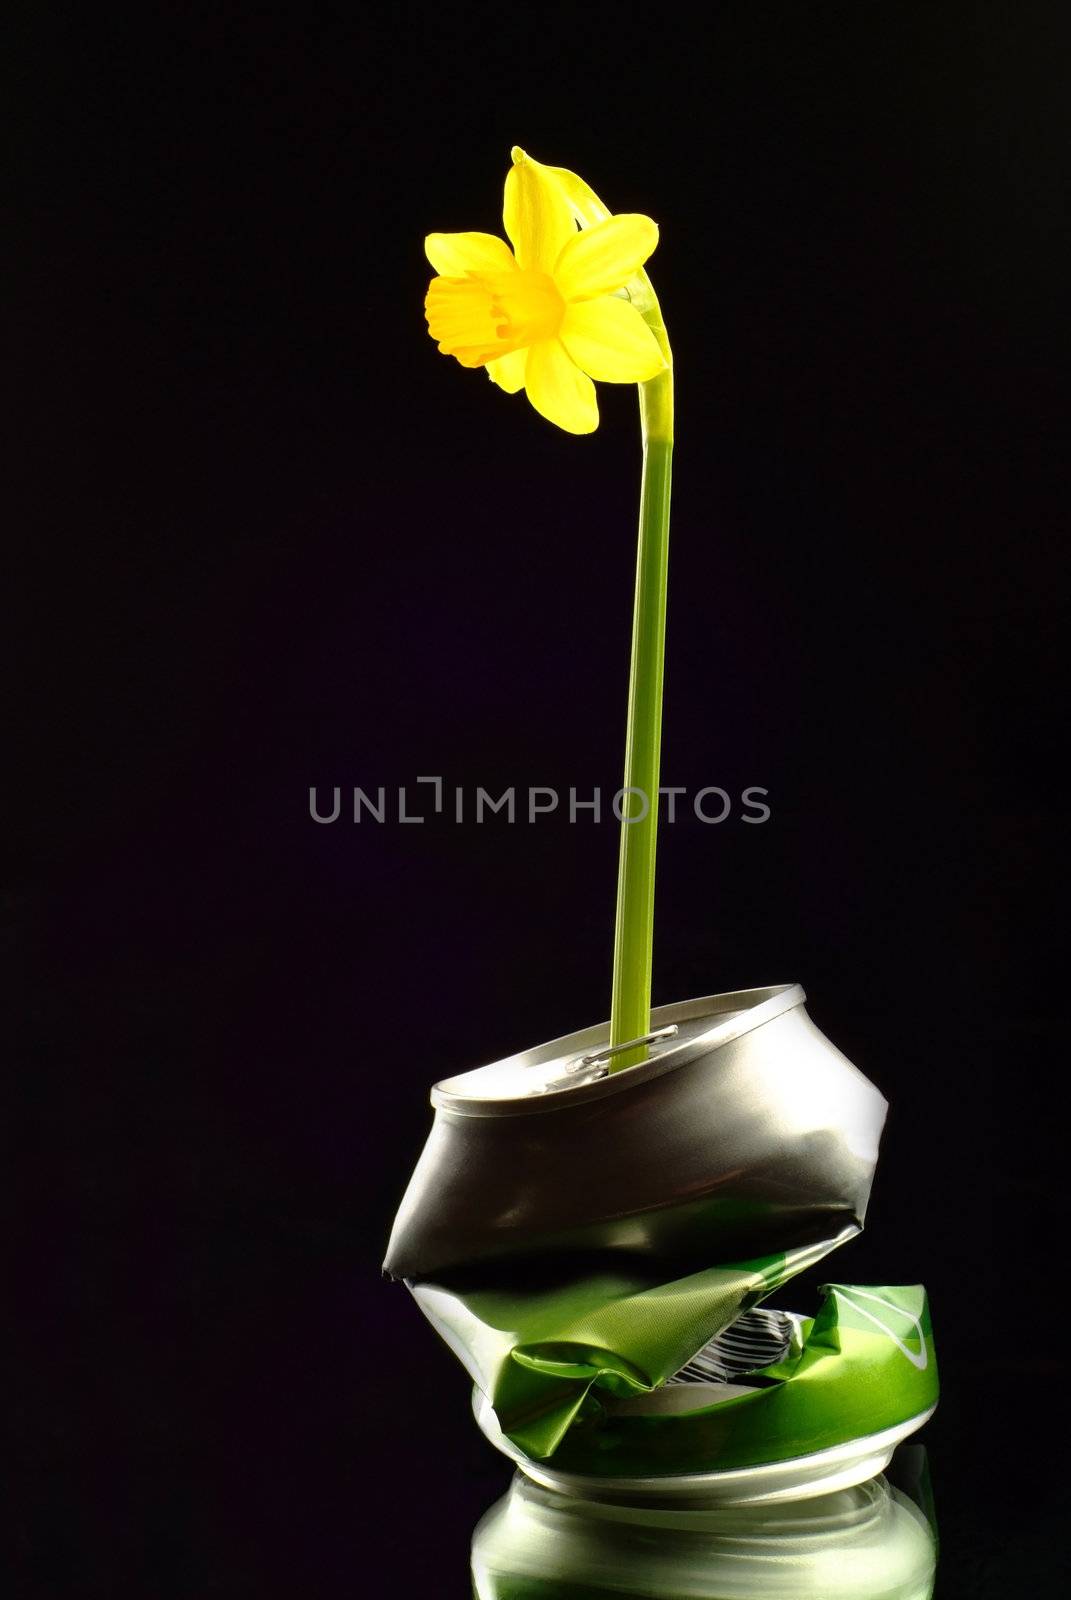 New Flower Growing in Crushed Can by alistaircotton